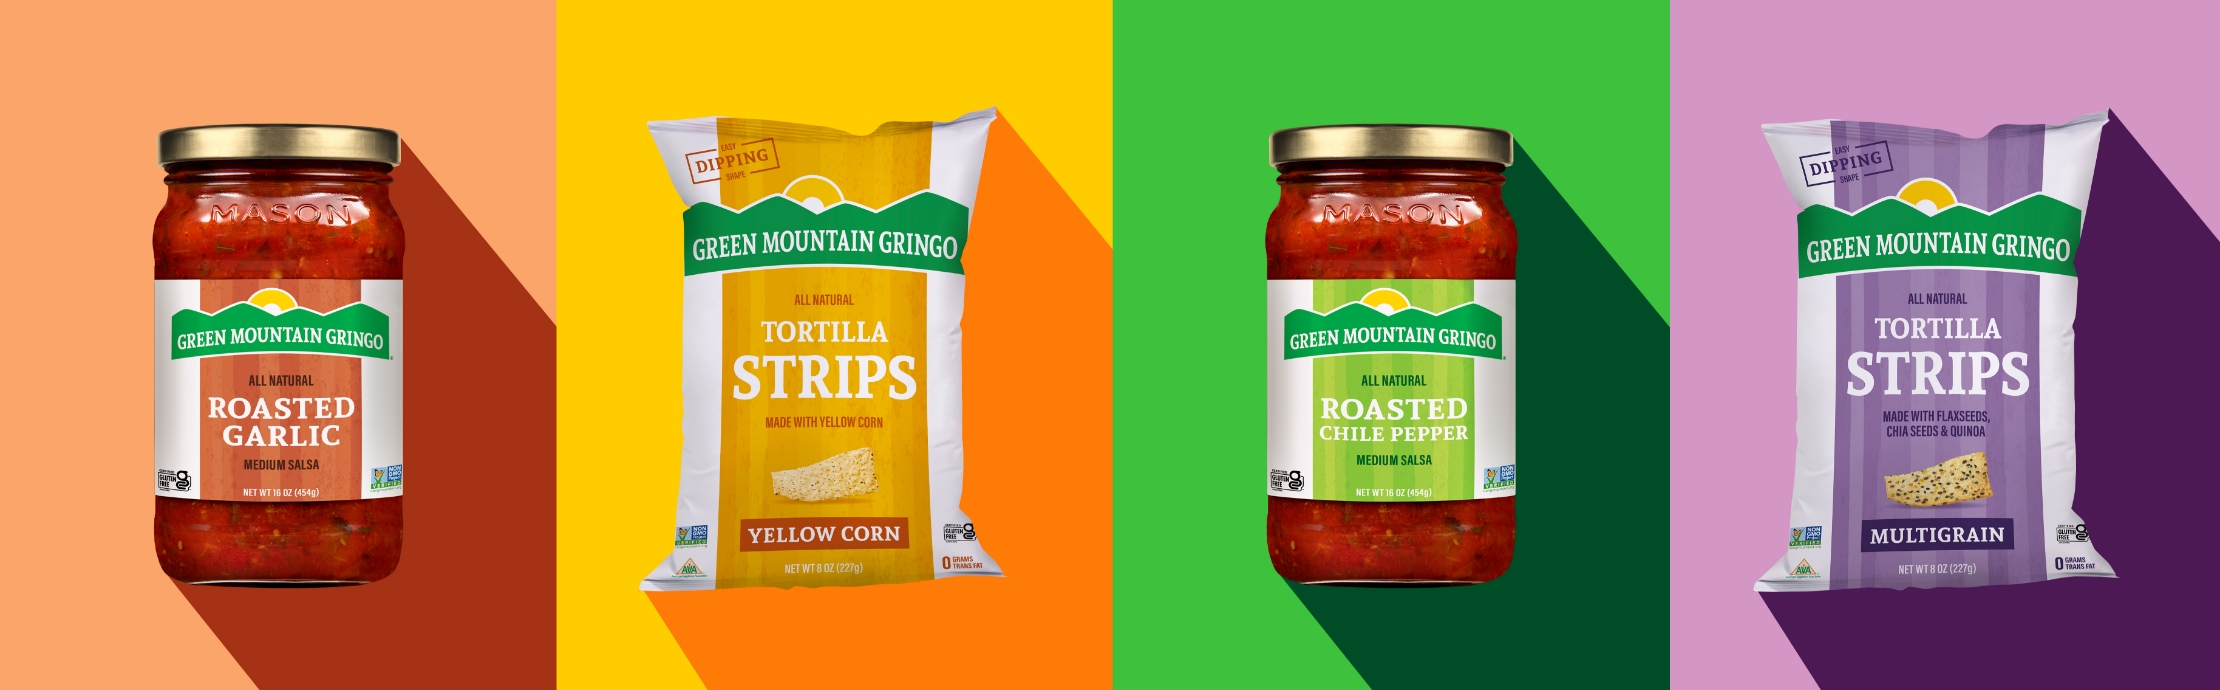 Green Mountain Gringo New Packaging Chips and Salsa